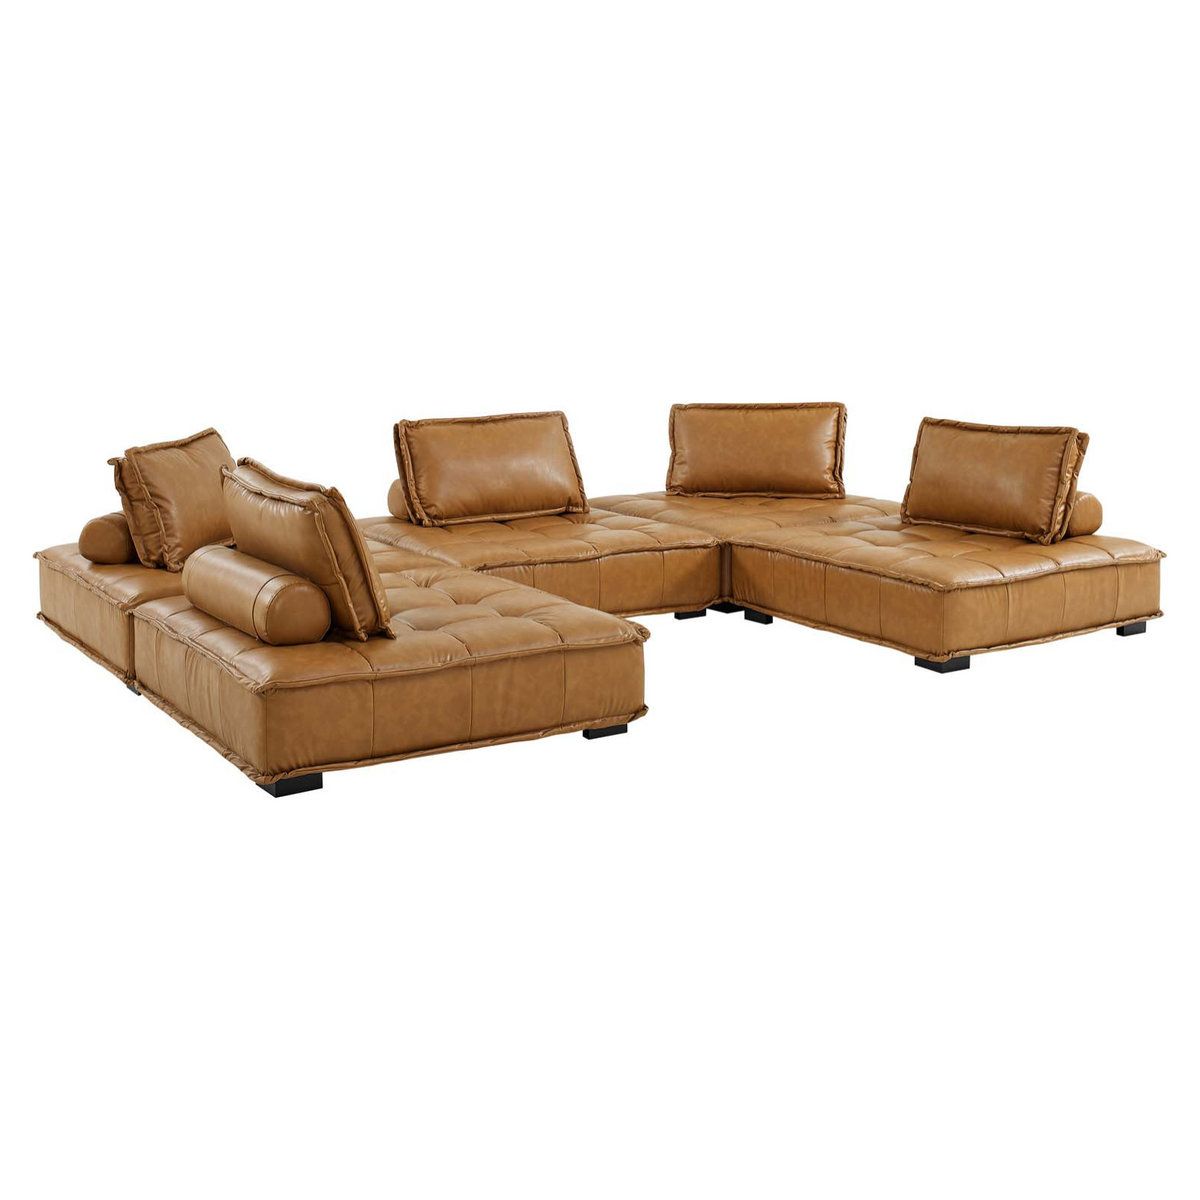 The Timeless Elegance of a Brown Leather Tufted Sectional Sofa